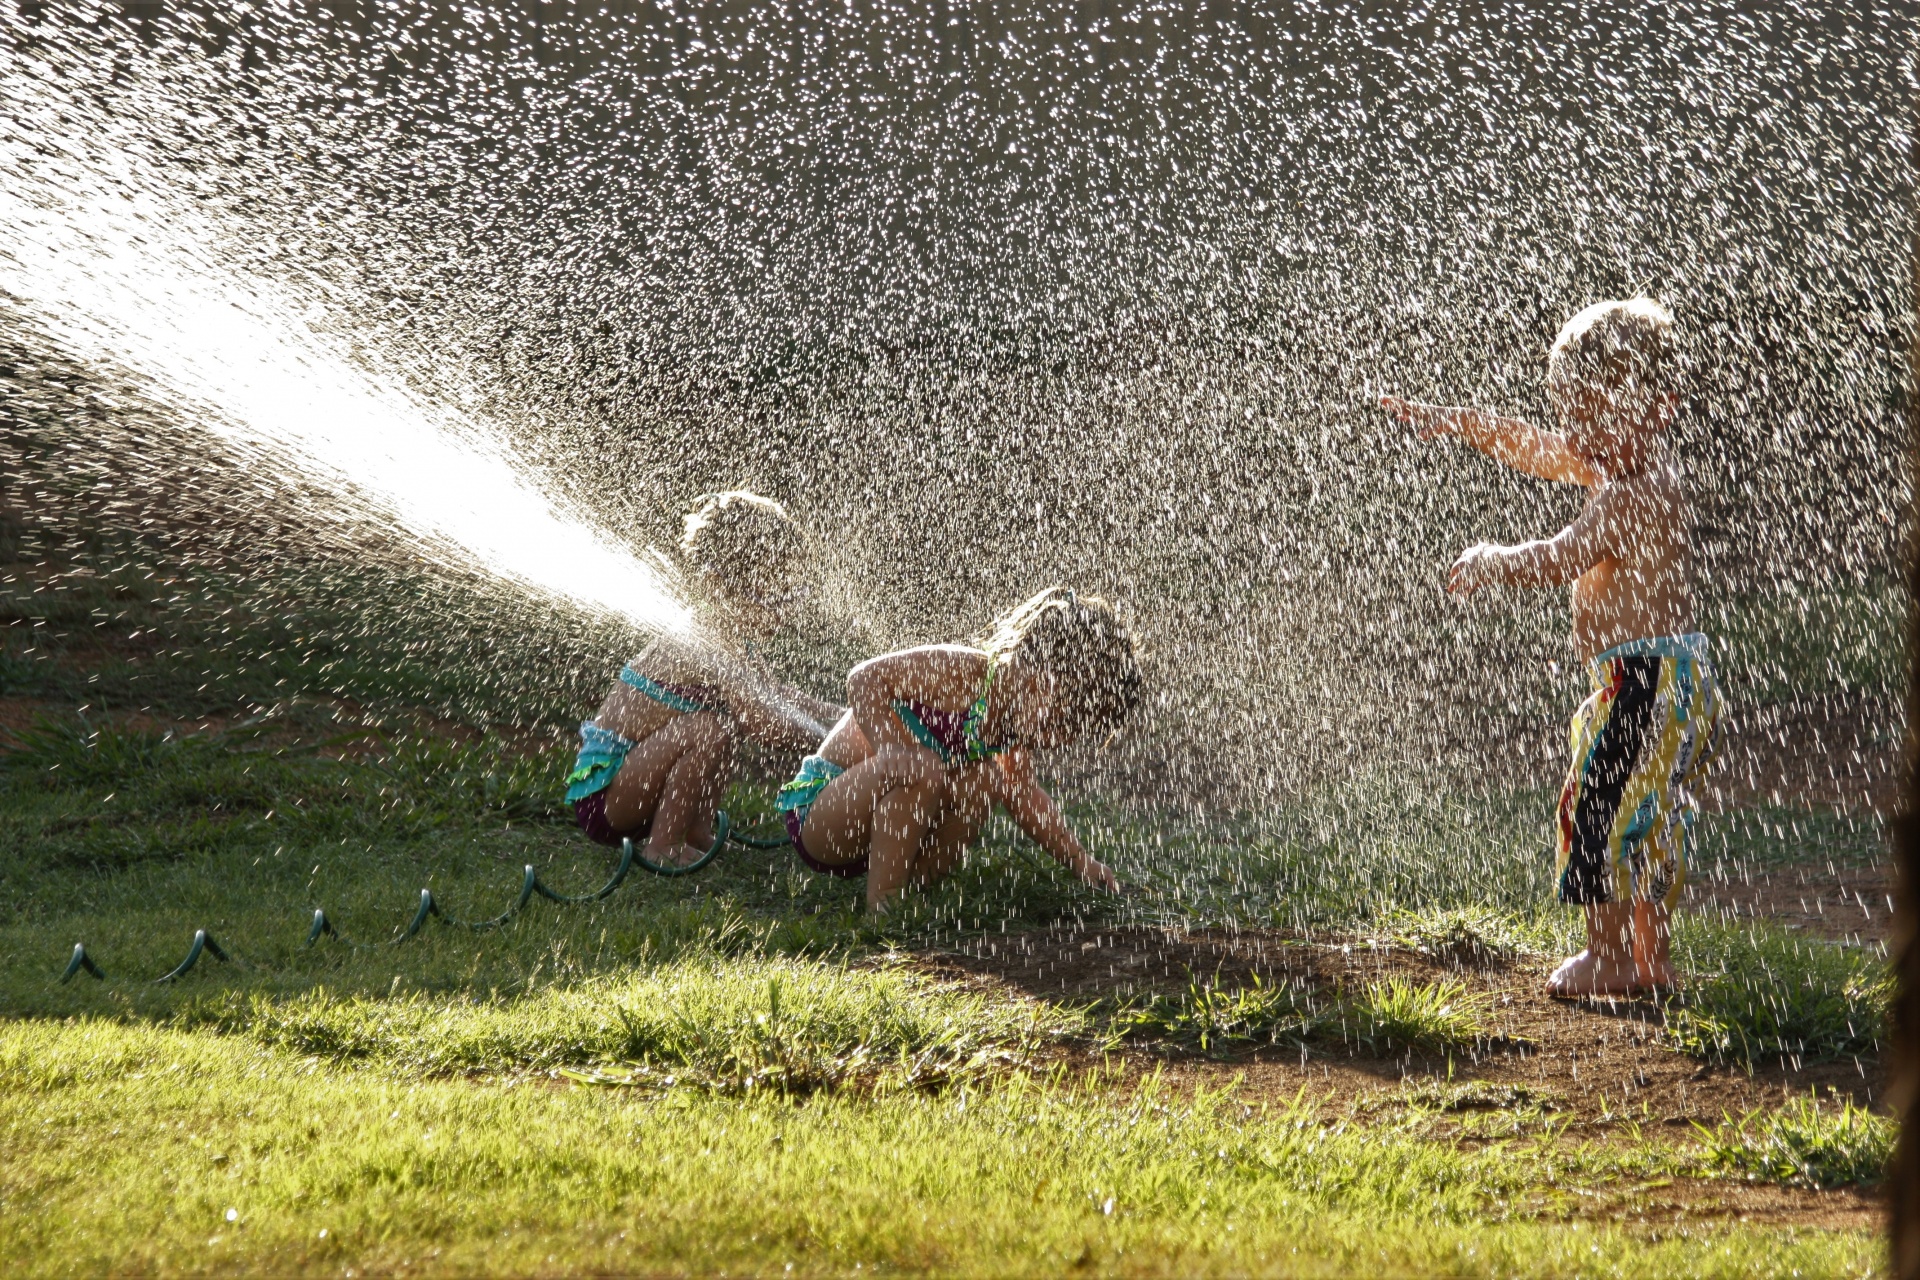 Three young children having fun playing in a water sprinkler on a hot summer day.